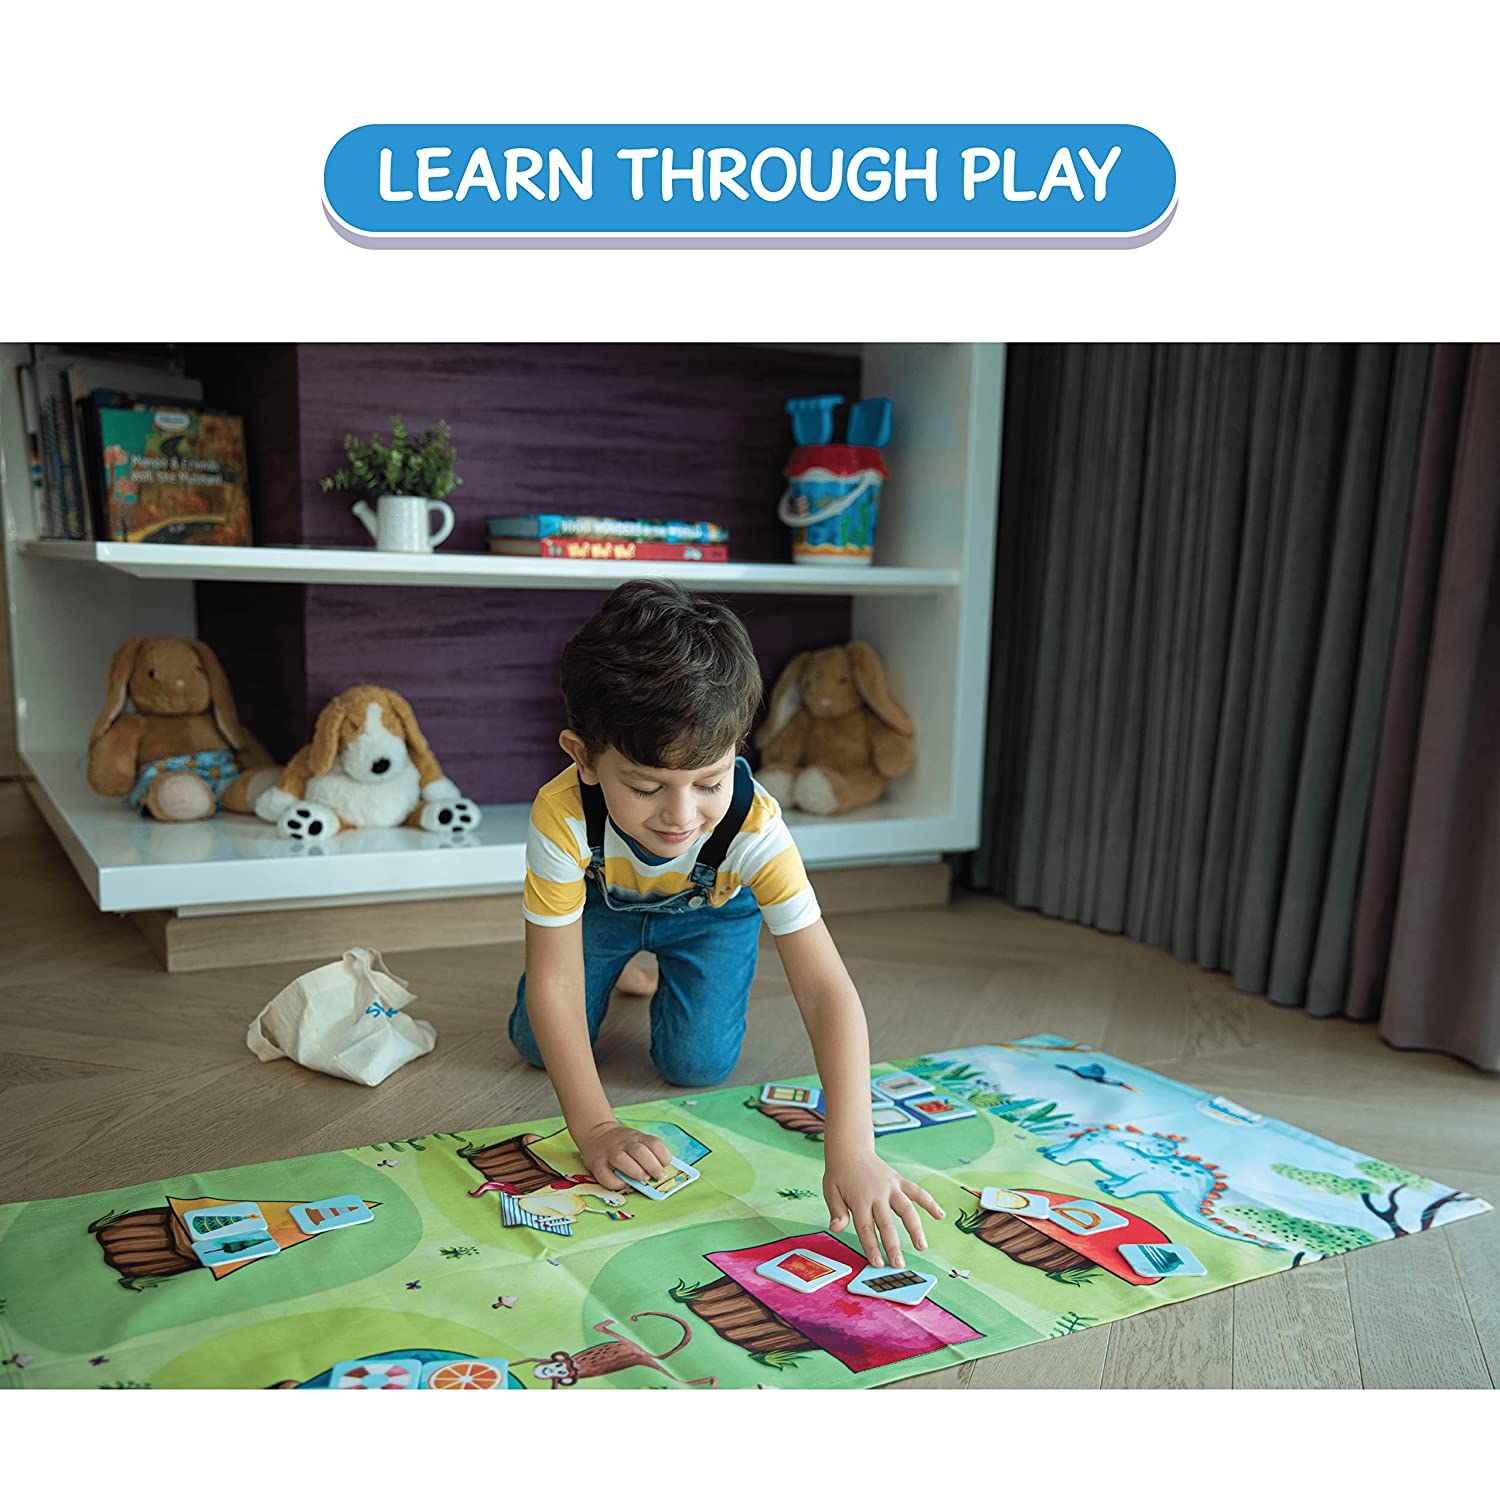 Skillmatics Preschool : Garden of Shapes - Educational Game for Kids Ages 3-6 Years